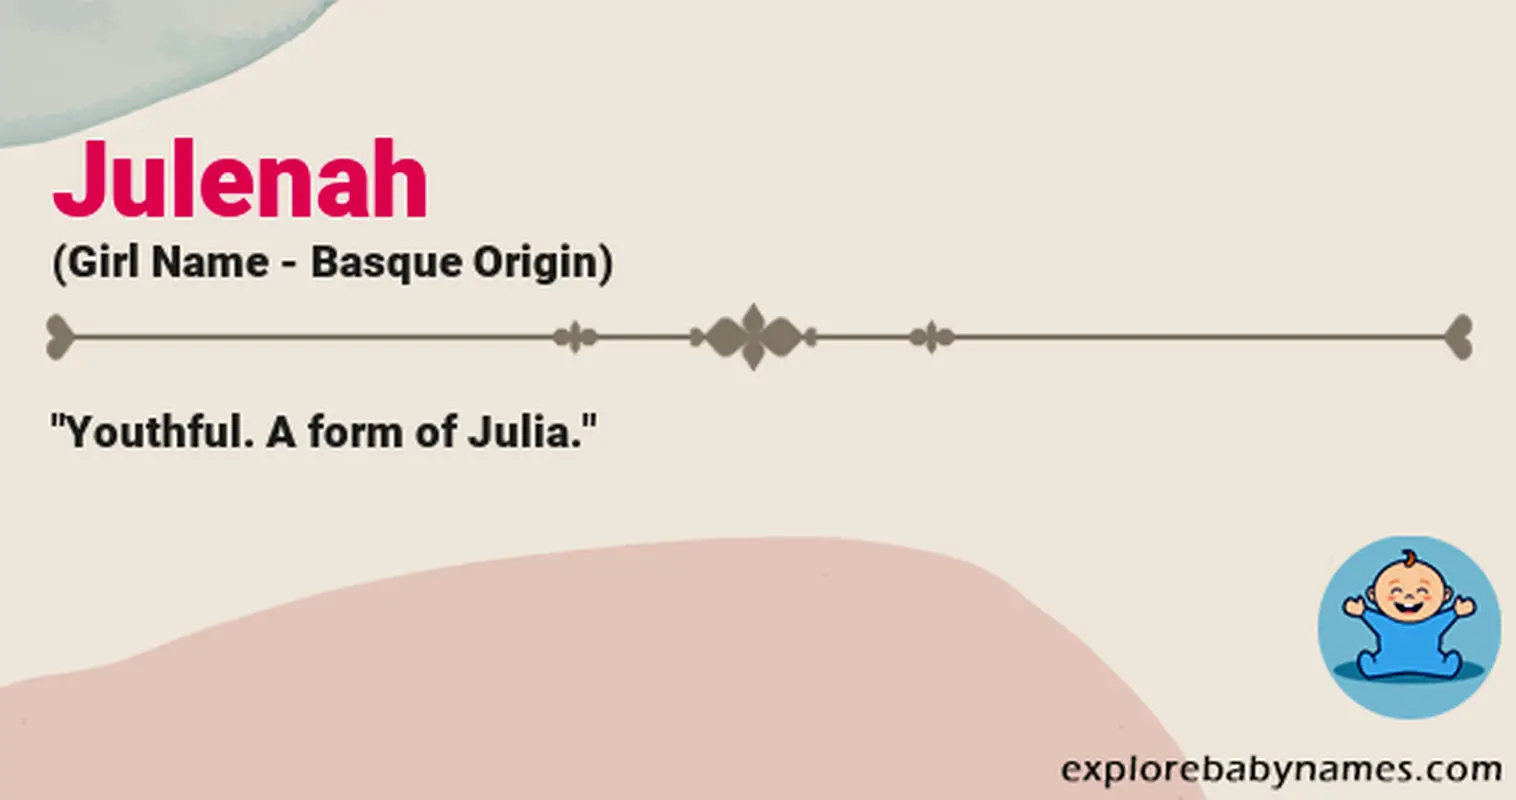 Meaning of Julenah